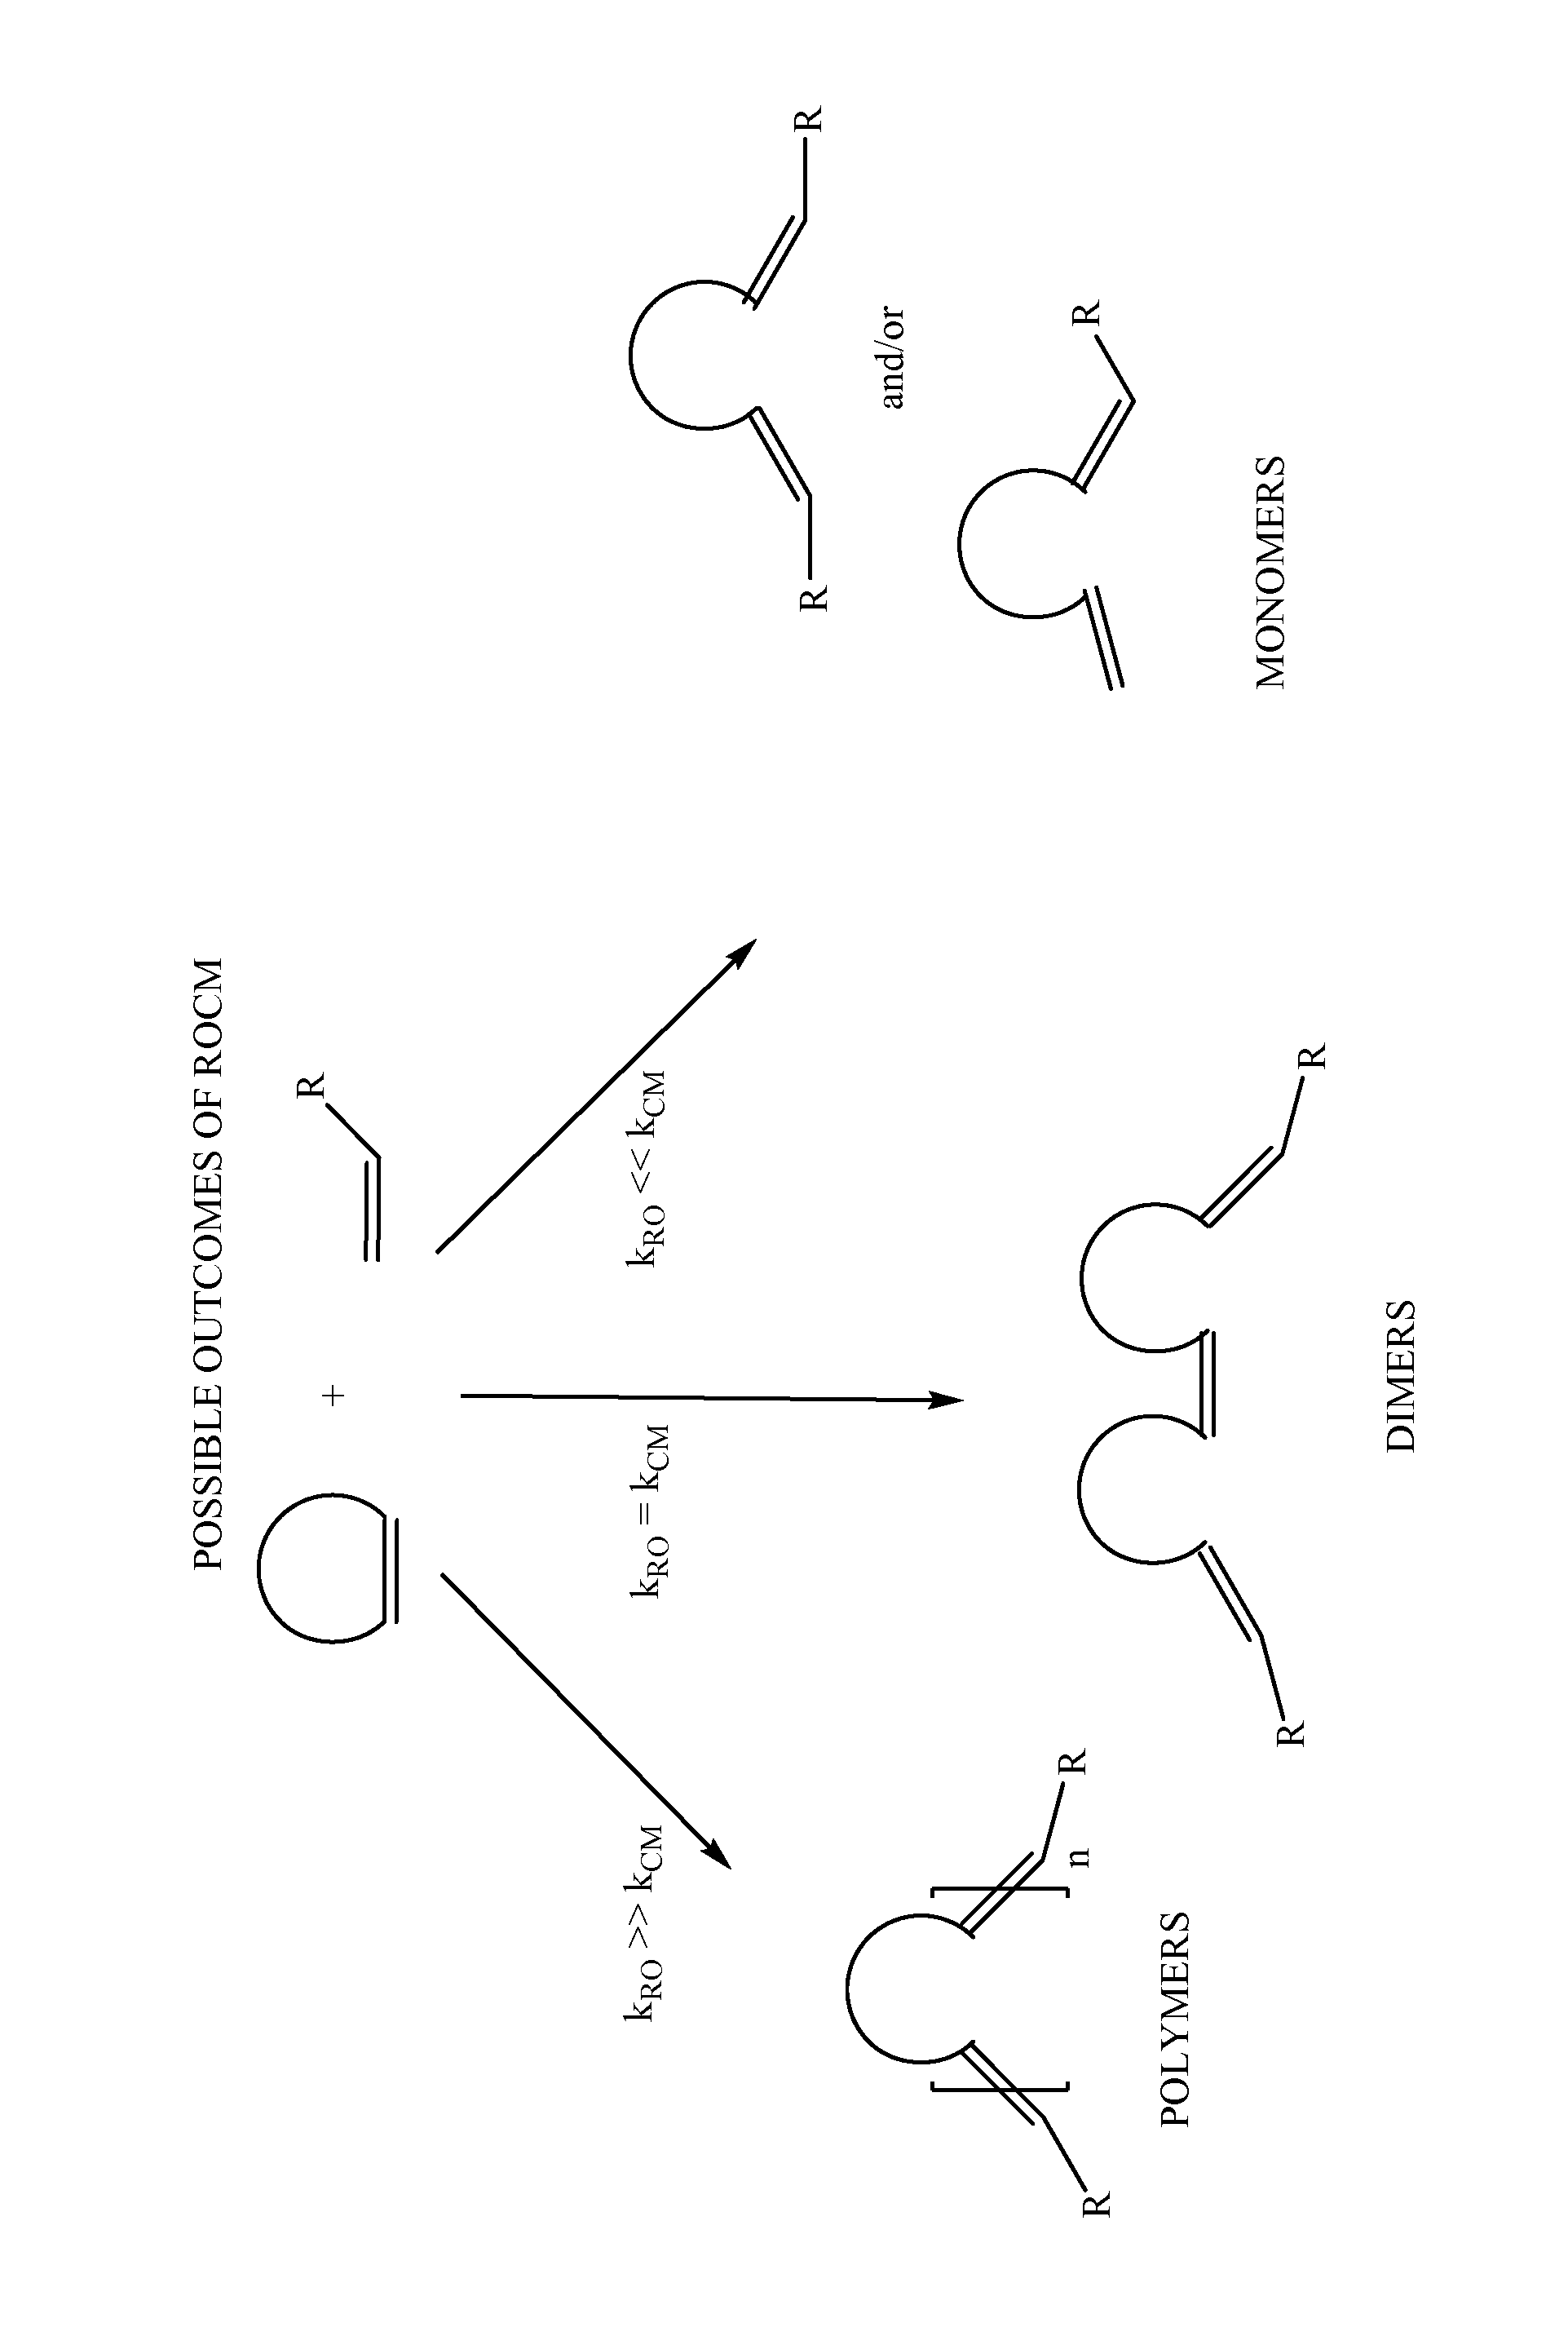 Class of olefin metathesis catalysts, methods of preparation, and processes for the use thereof